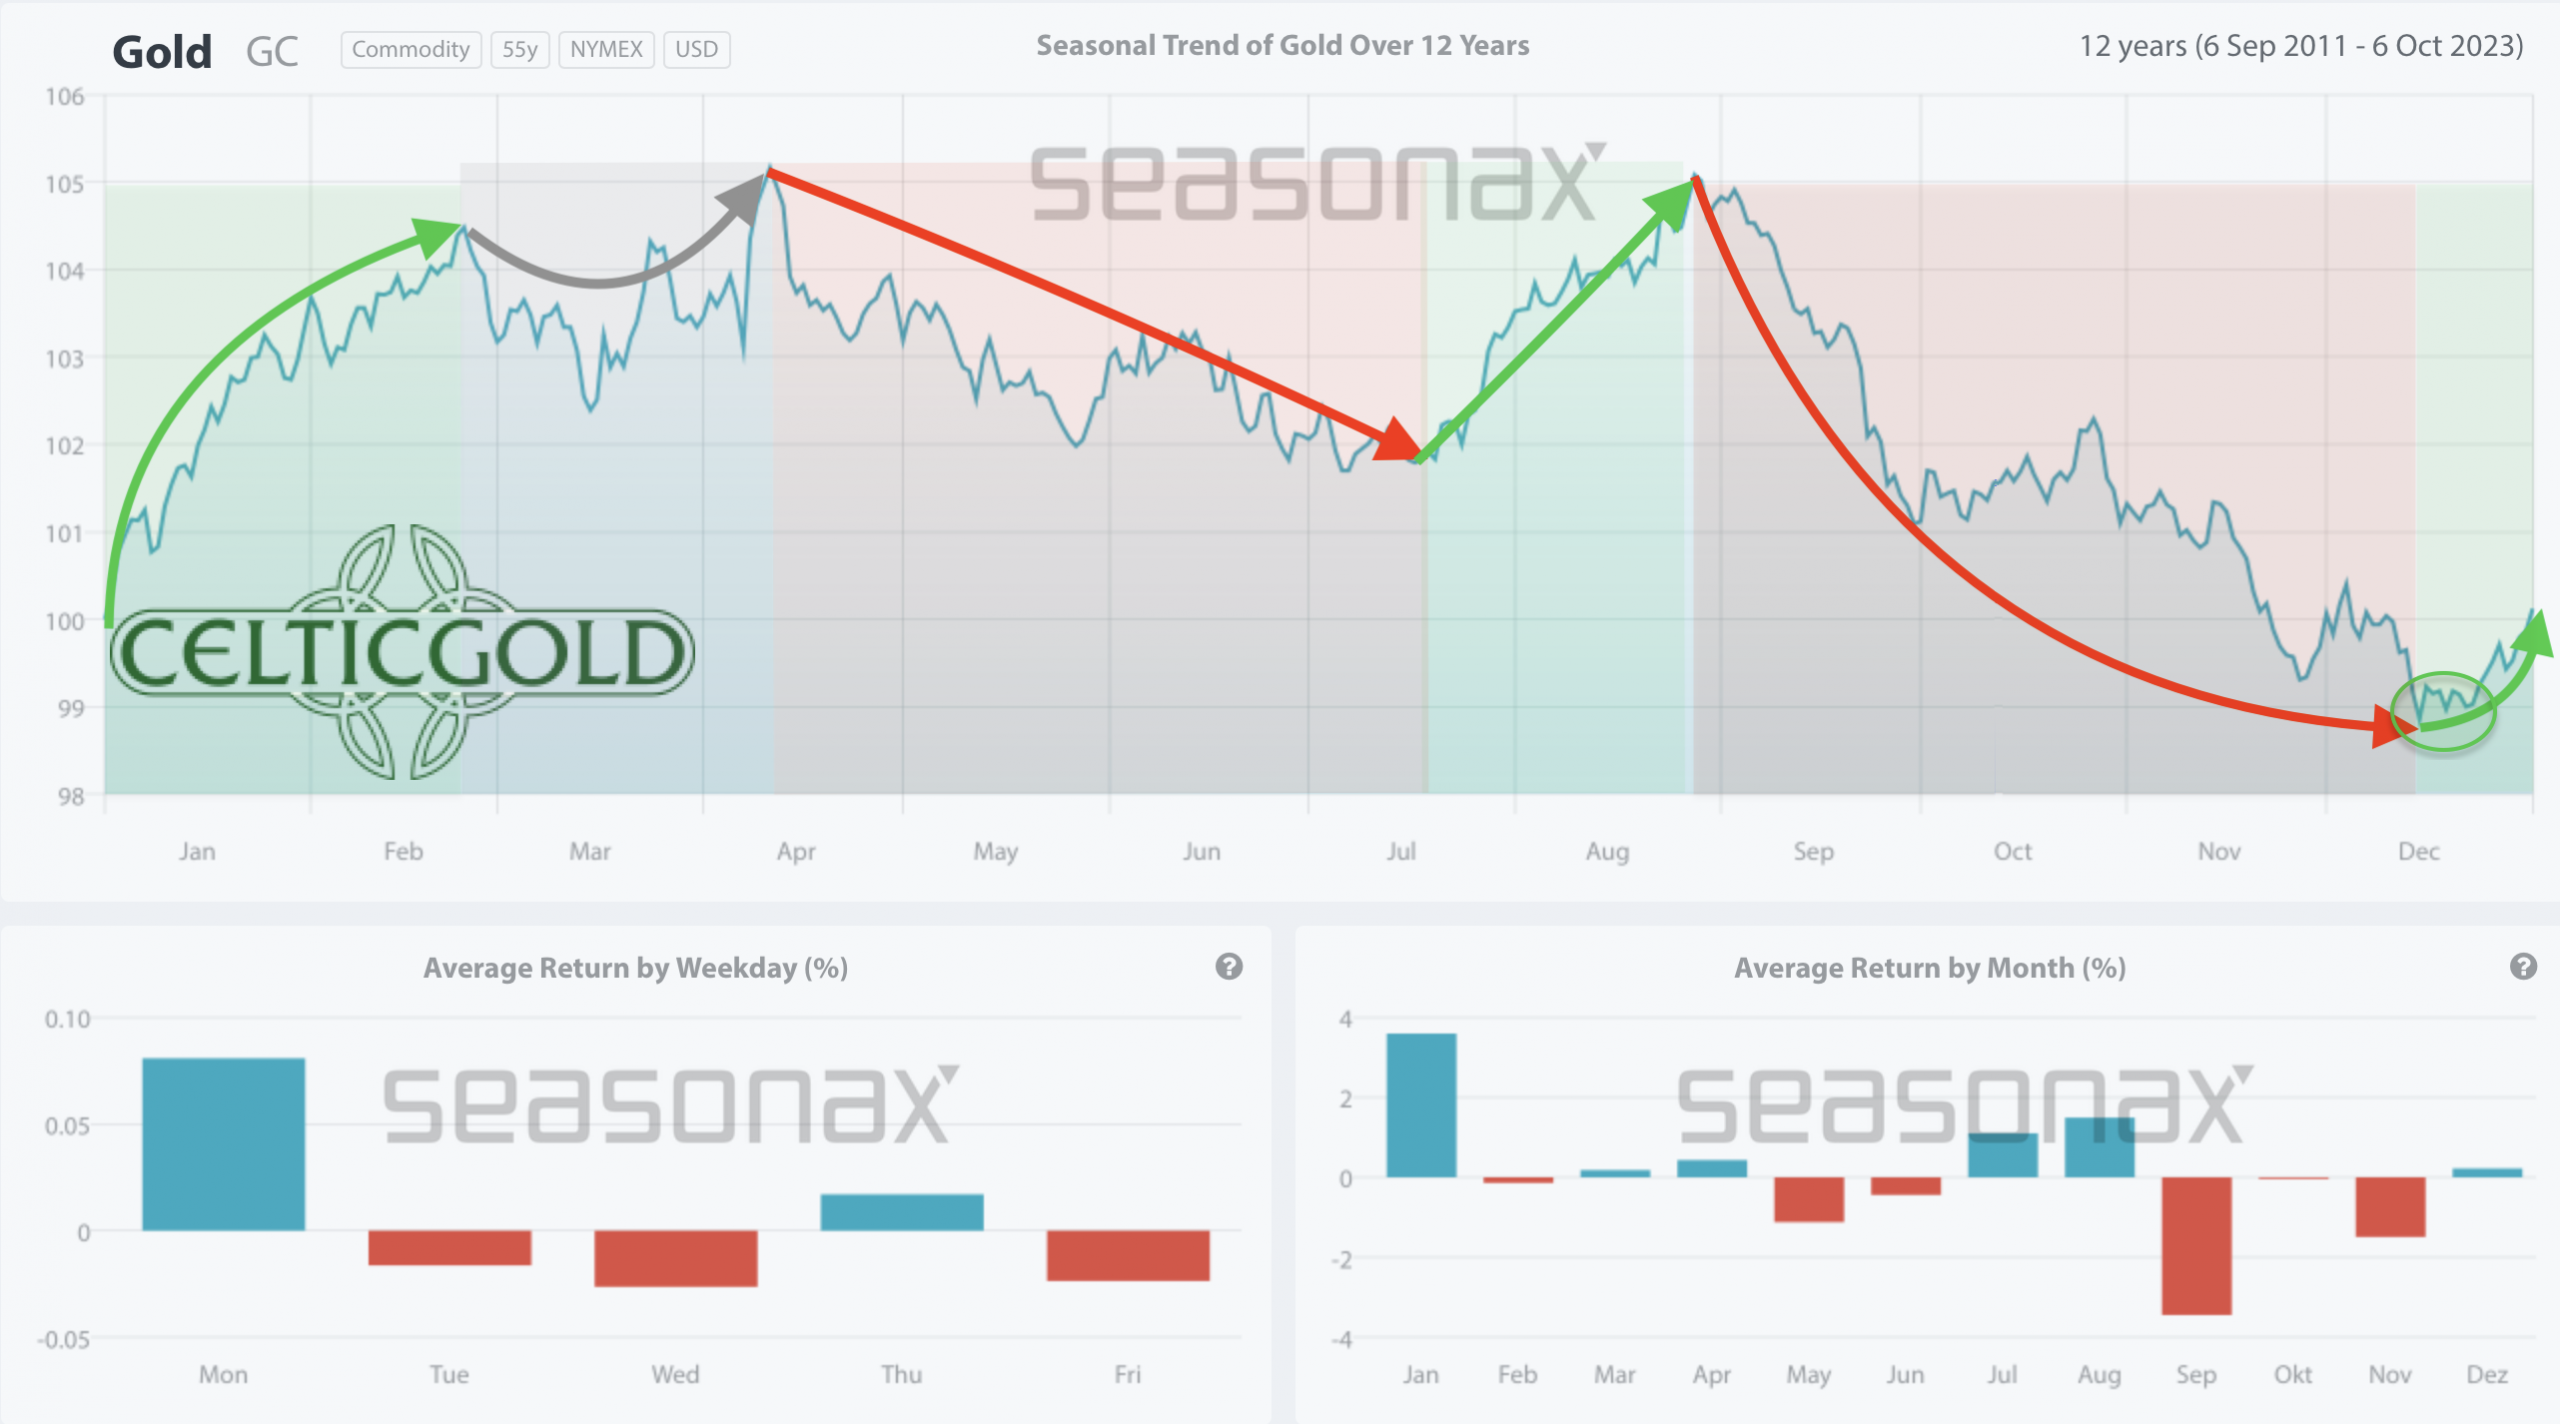 Seasonality for gold over the last 12-years as of April 29th